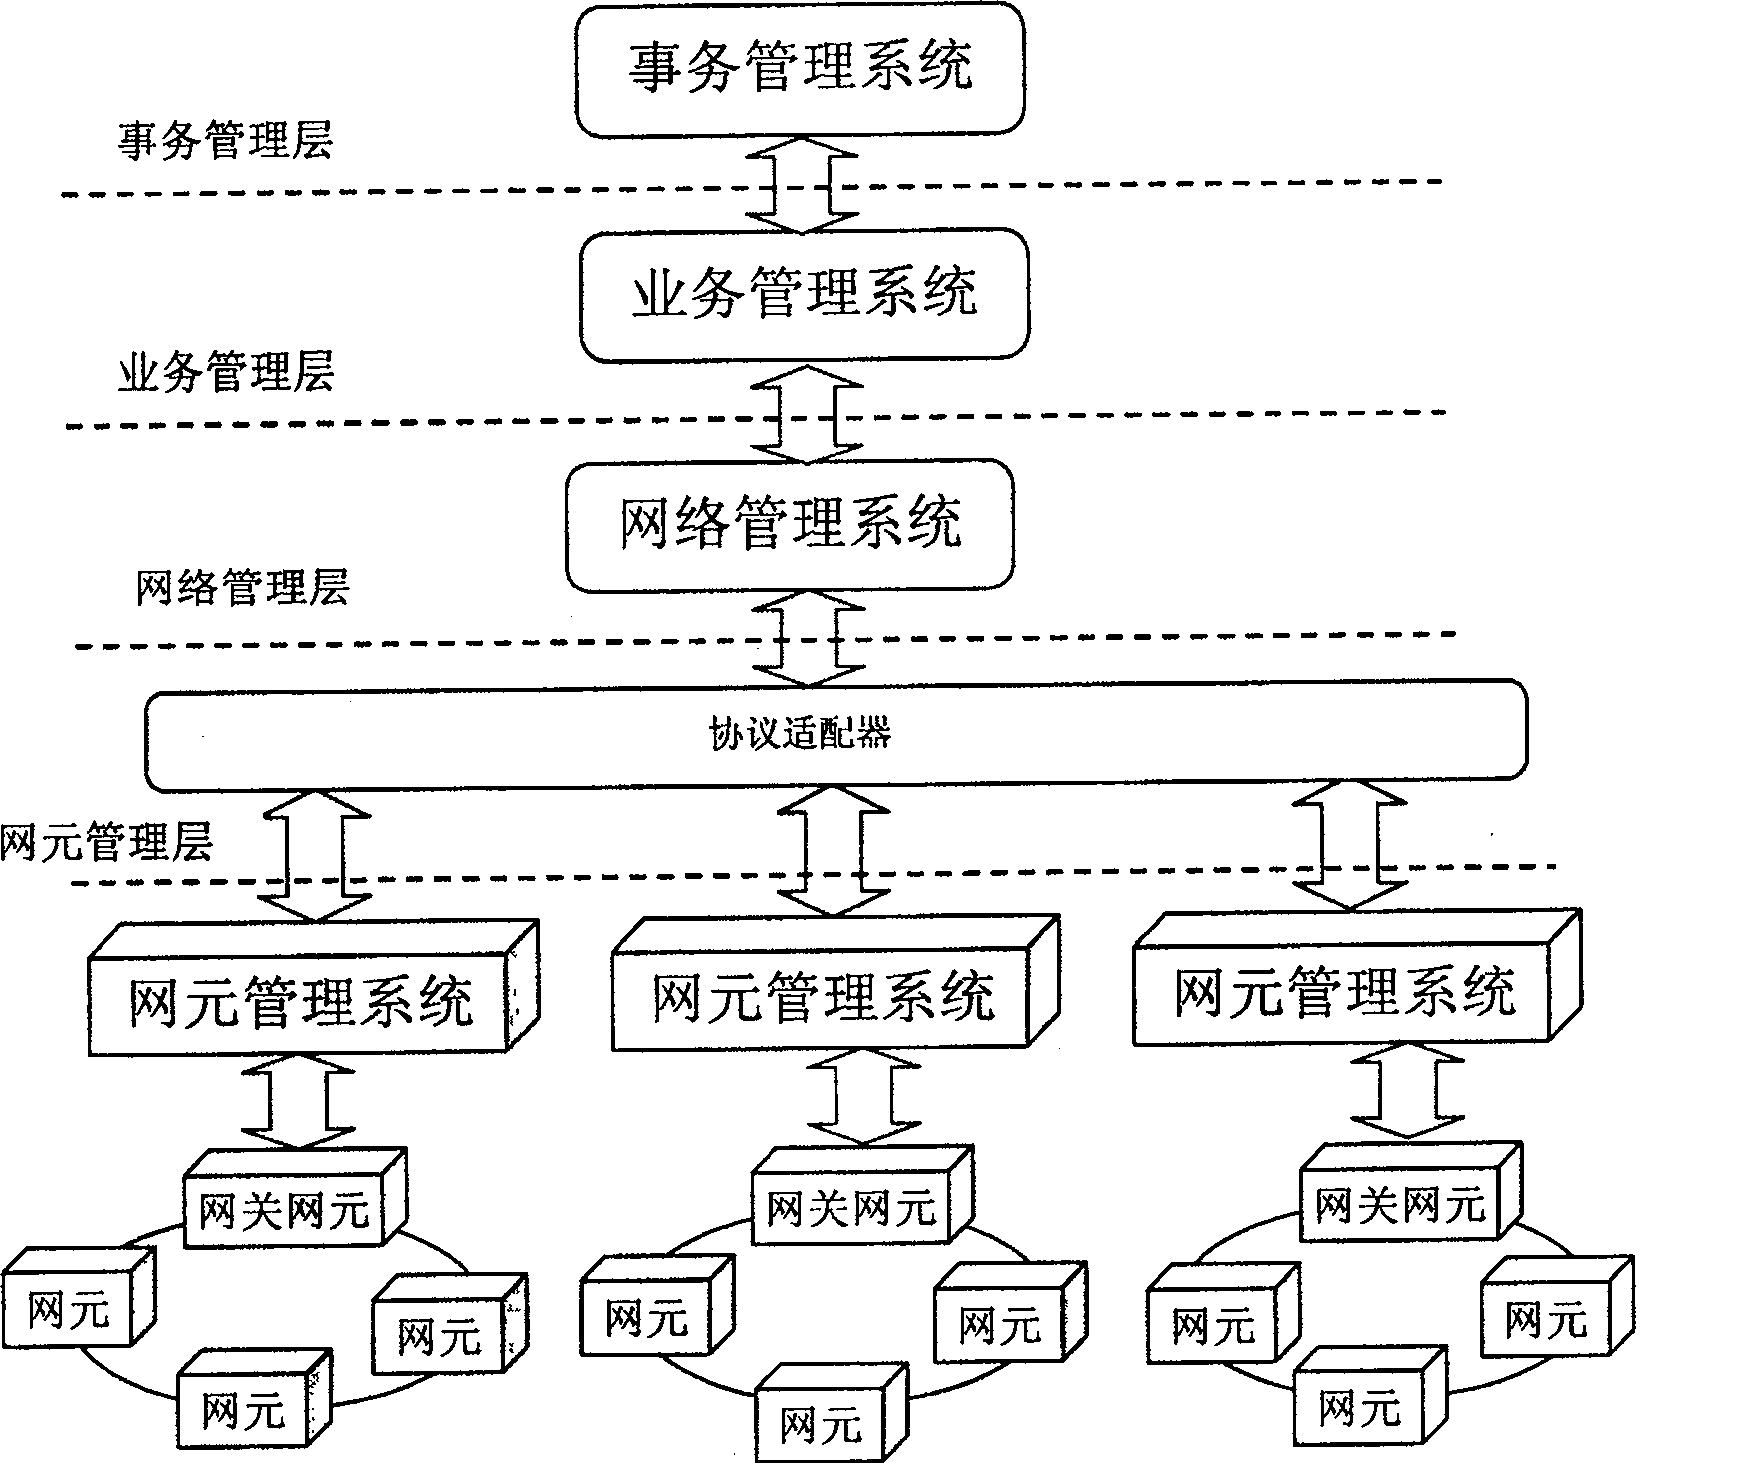 Network management interface adapter and information interacting method